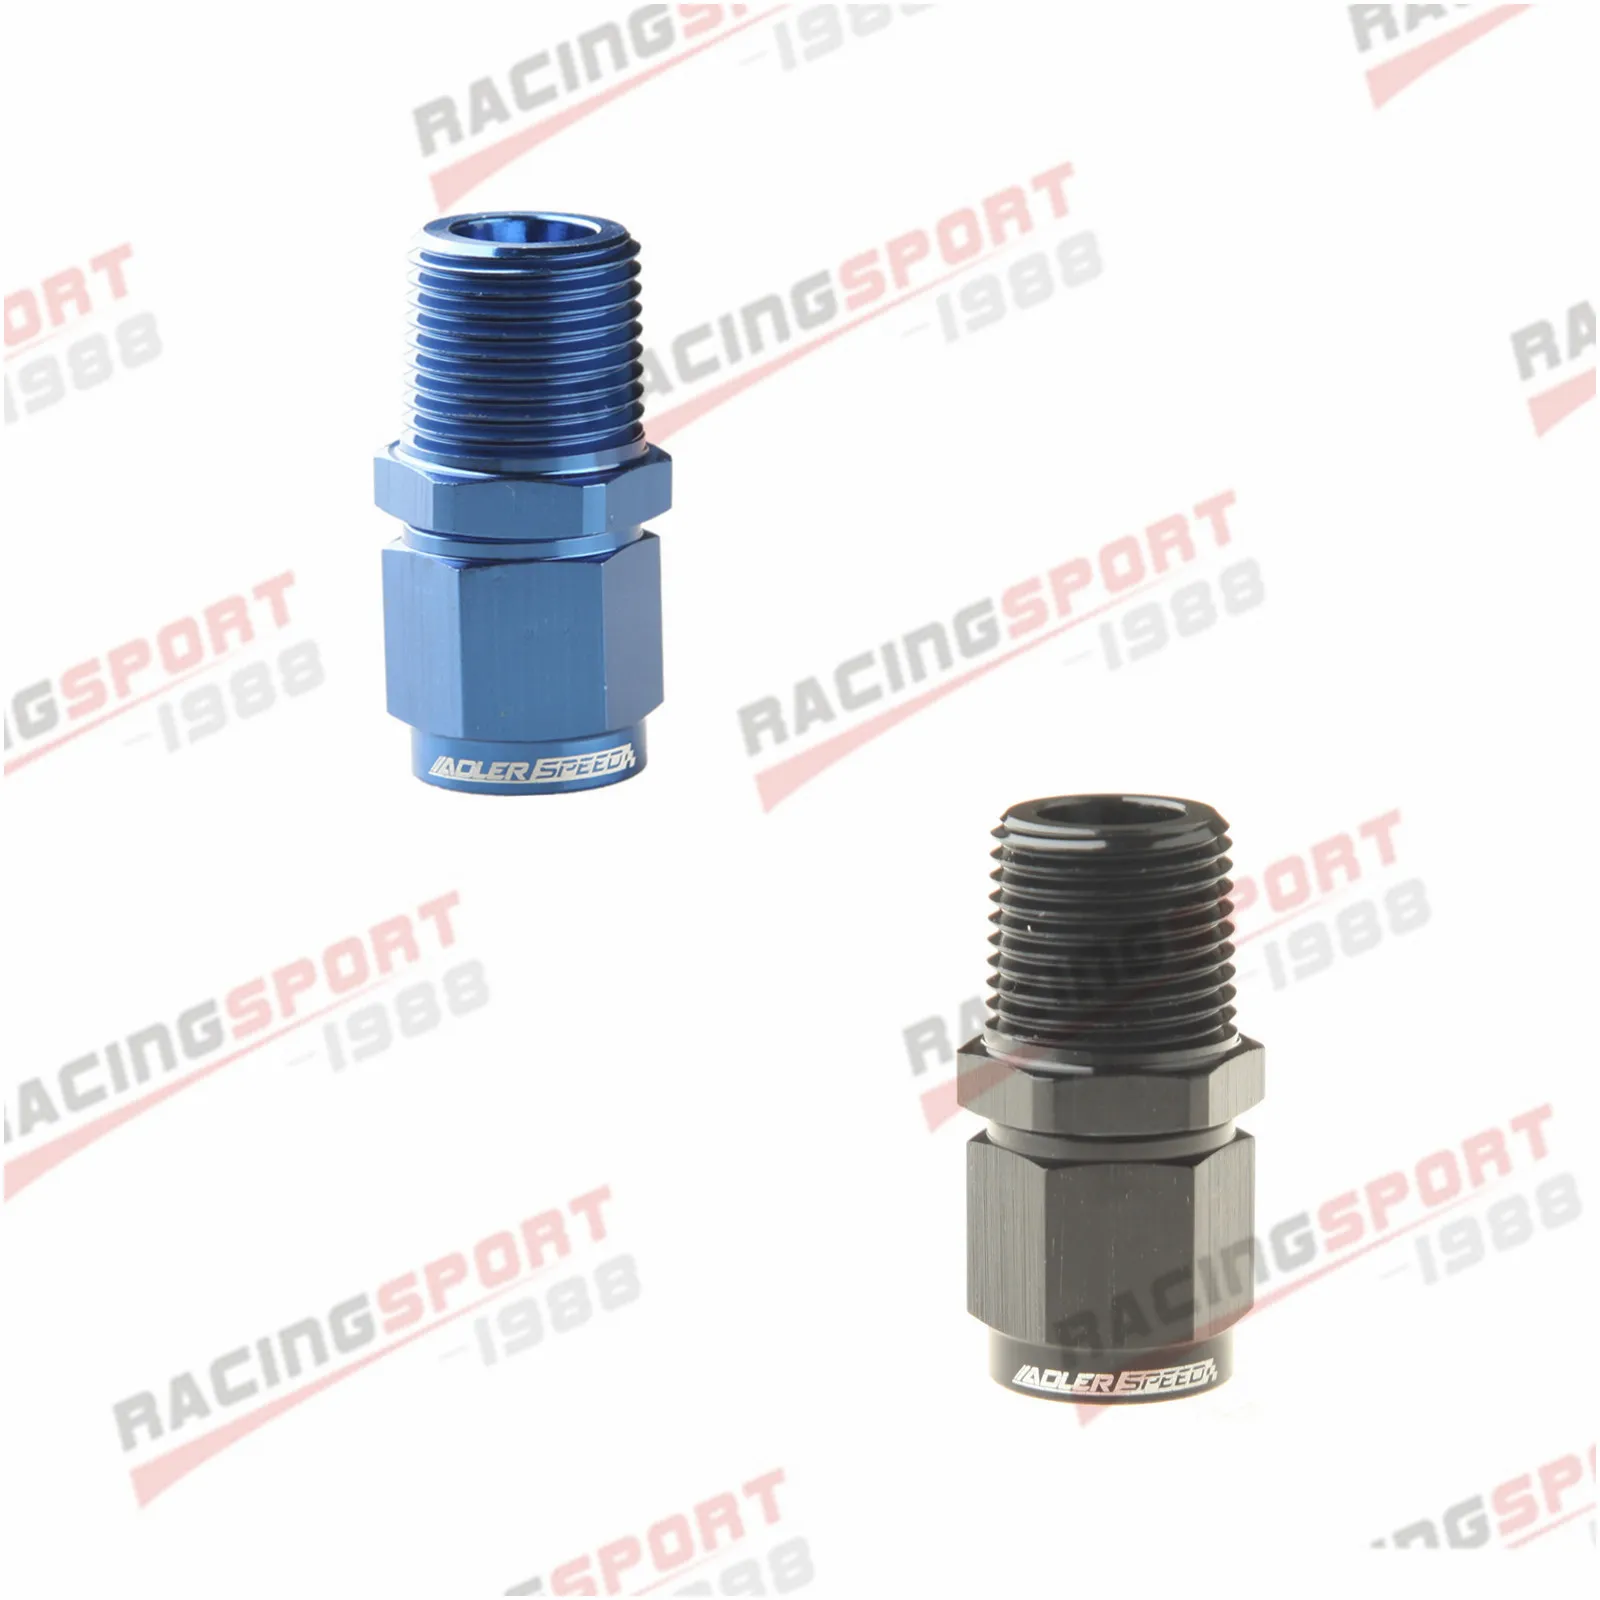 Male AN6 6AN AN-6 to 3/8'' NPT Straight Fuel Oil Air Pipe Tank Fitting Adapter